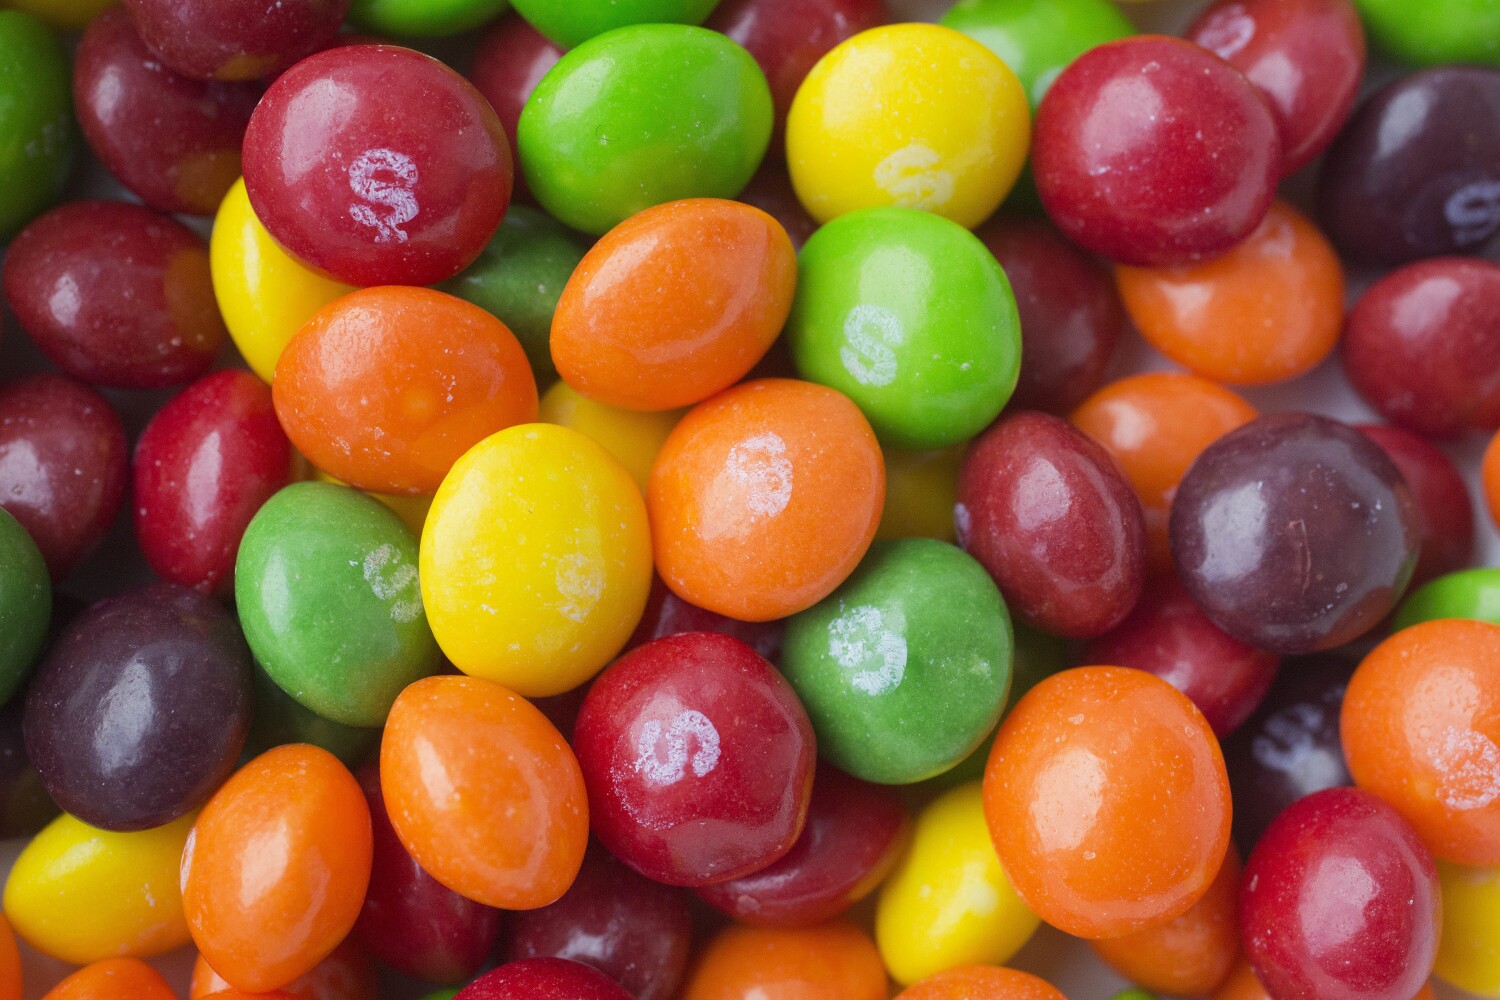 Skittles 'unfit for human consumption,' California lawsuit claims